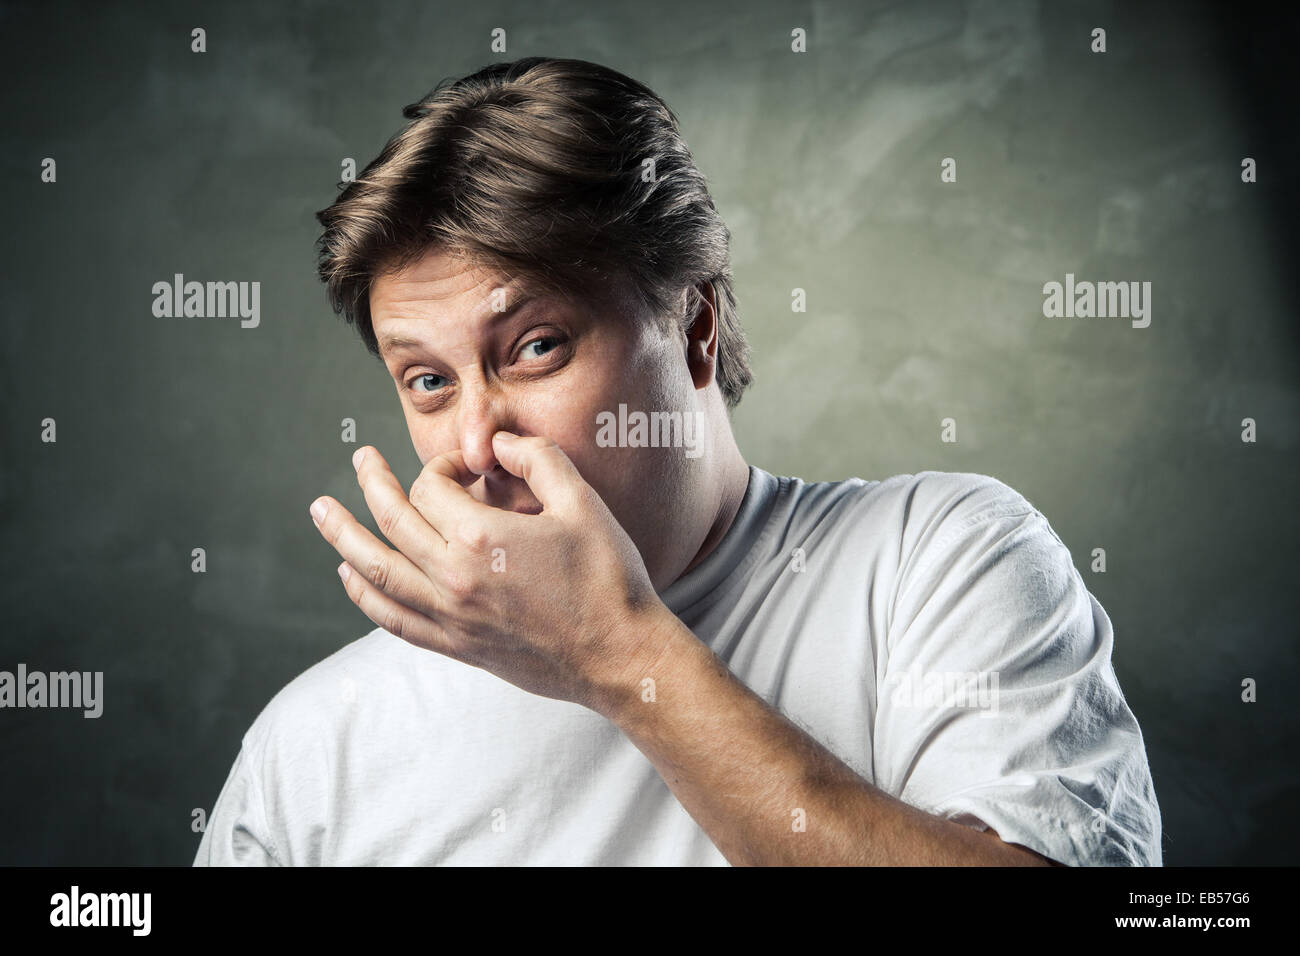 Man with disgusted expression closing his nostrils with his fingers Stock Photo